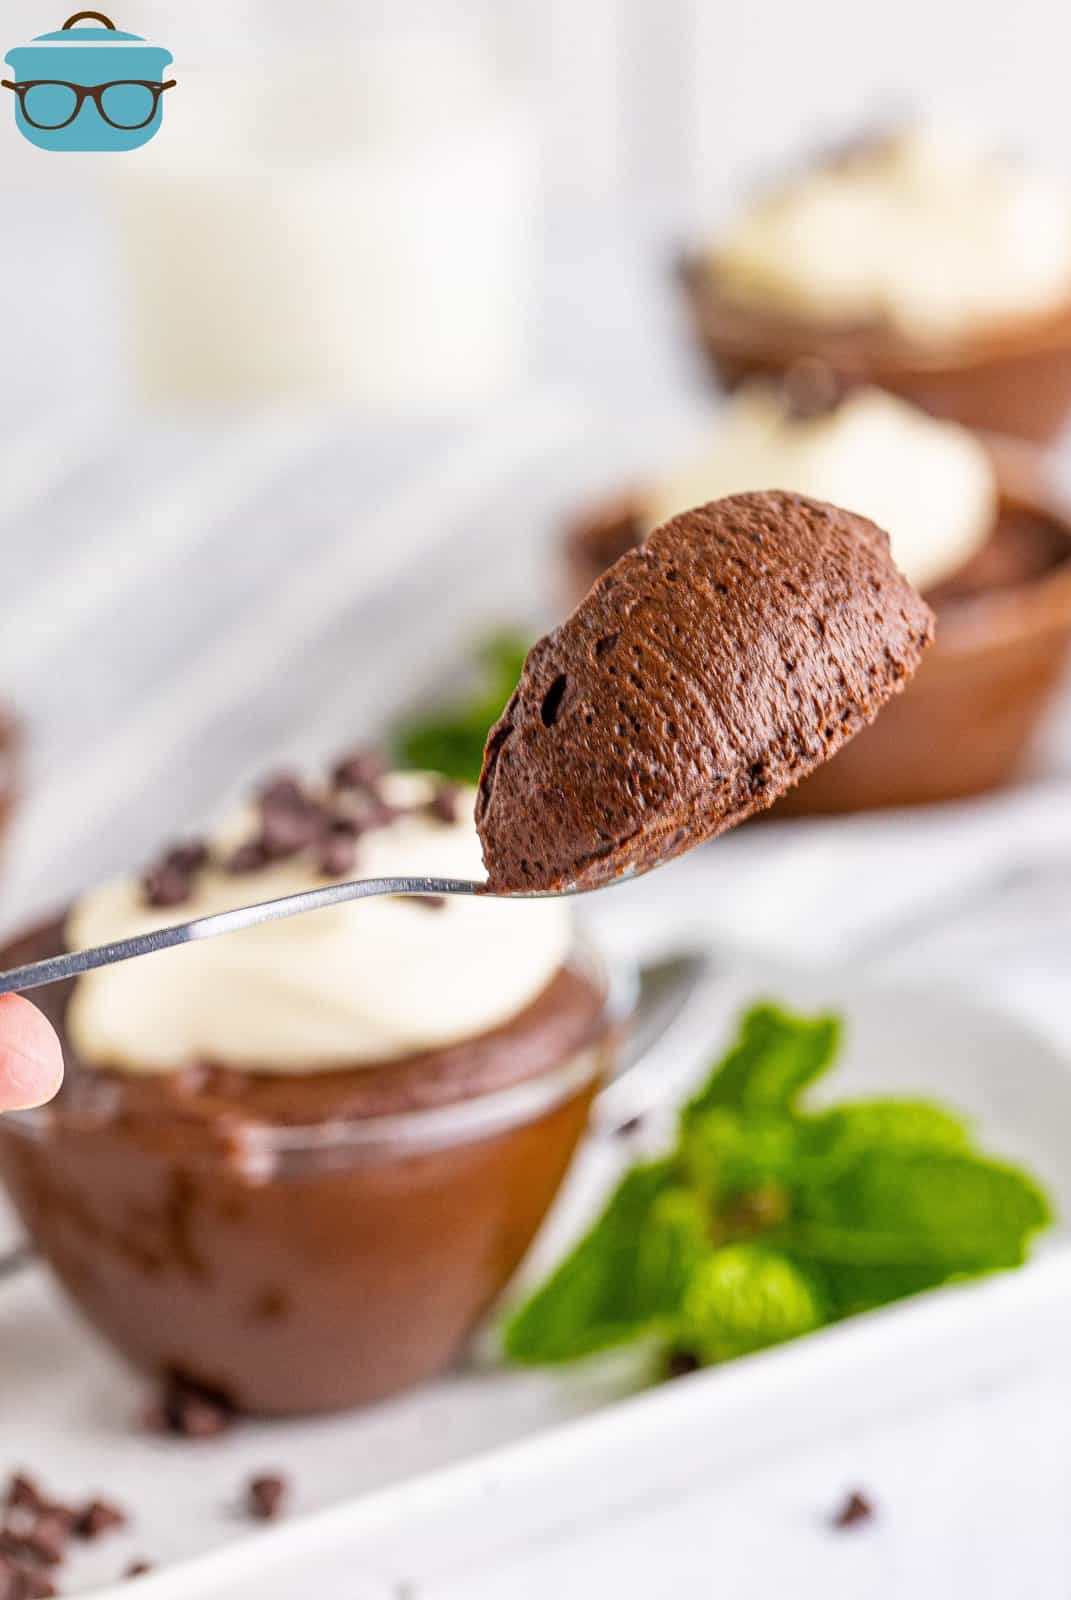 Spoon holding up some of the Easy Chocolate Mousse.